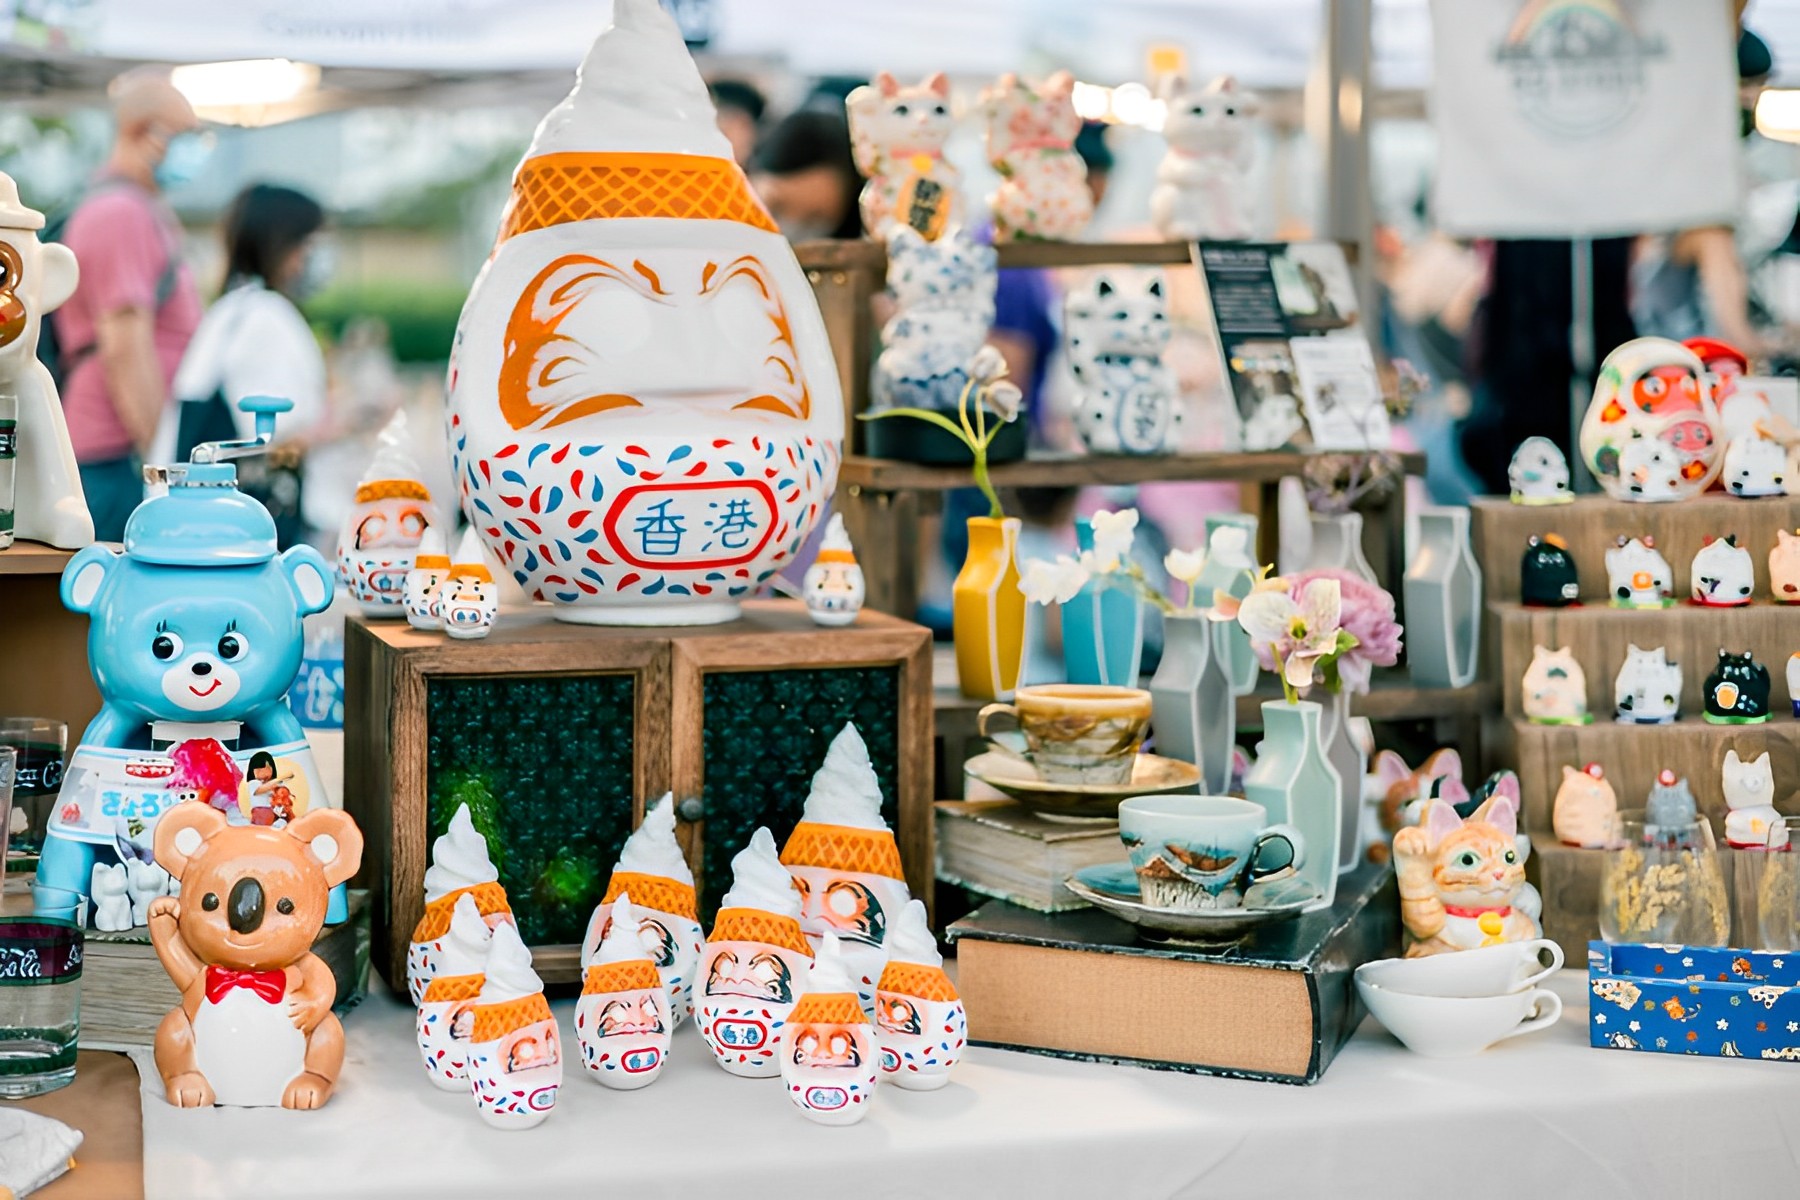 Browse stalls selling creative handmade designs at the SummerFest x LOCOLOCO Market.